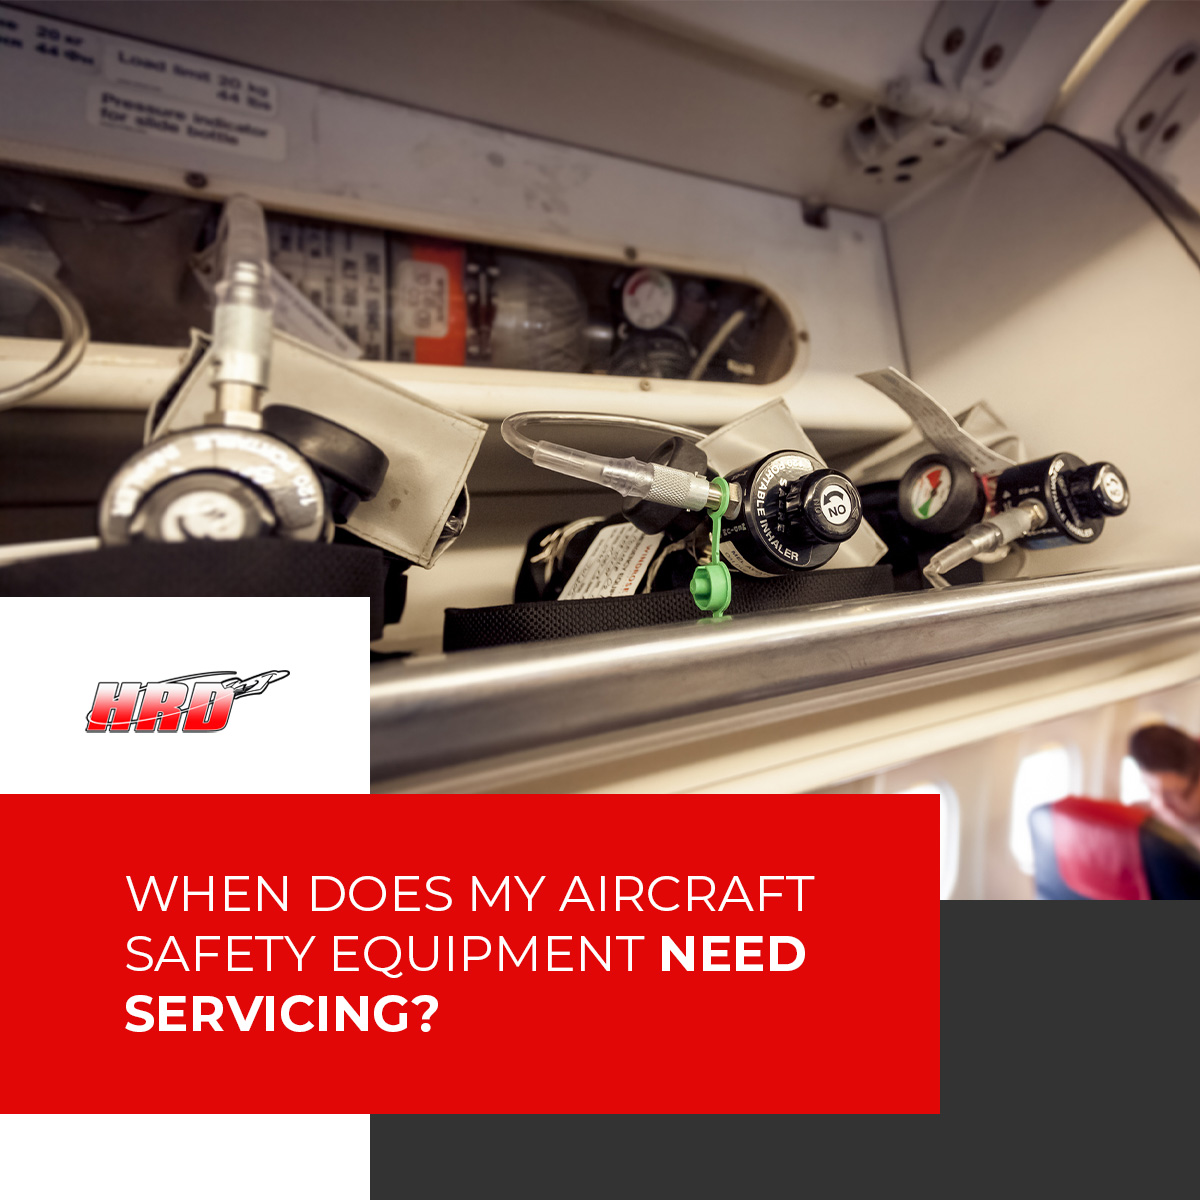 When Does My Aircraft Safety Equipment Need Servicing?